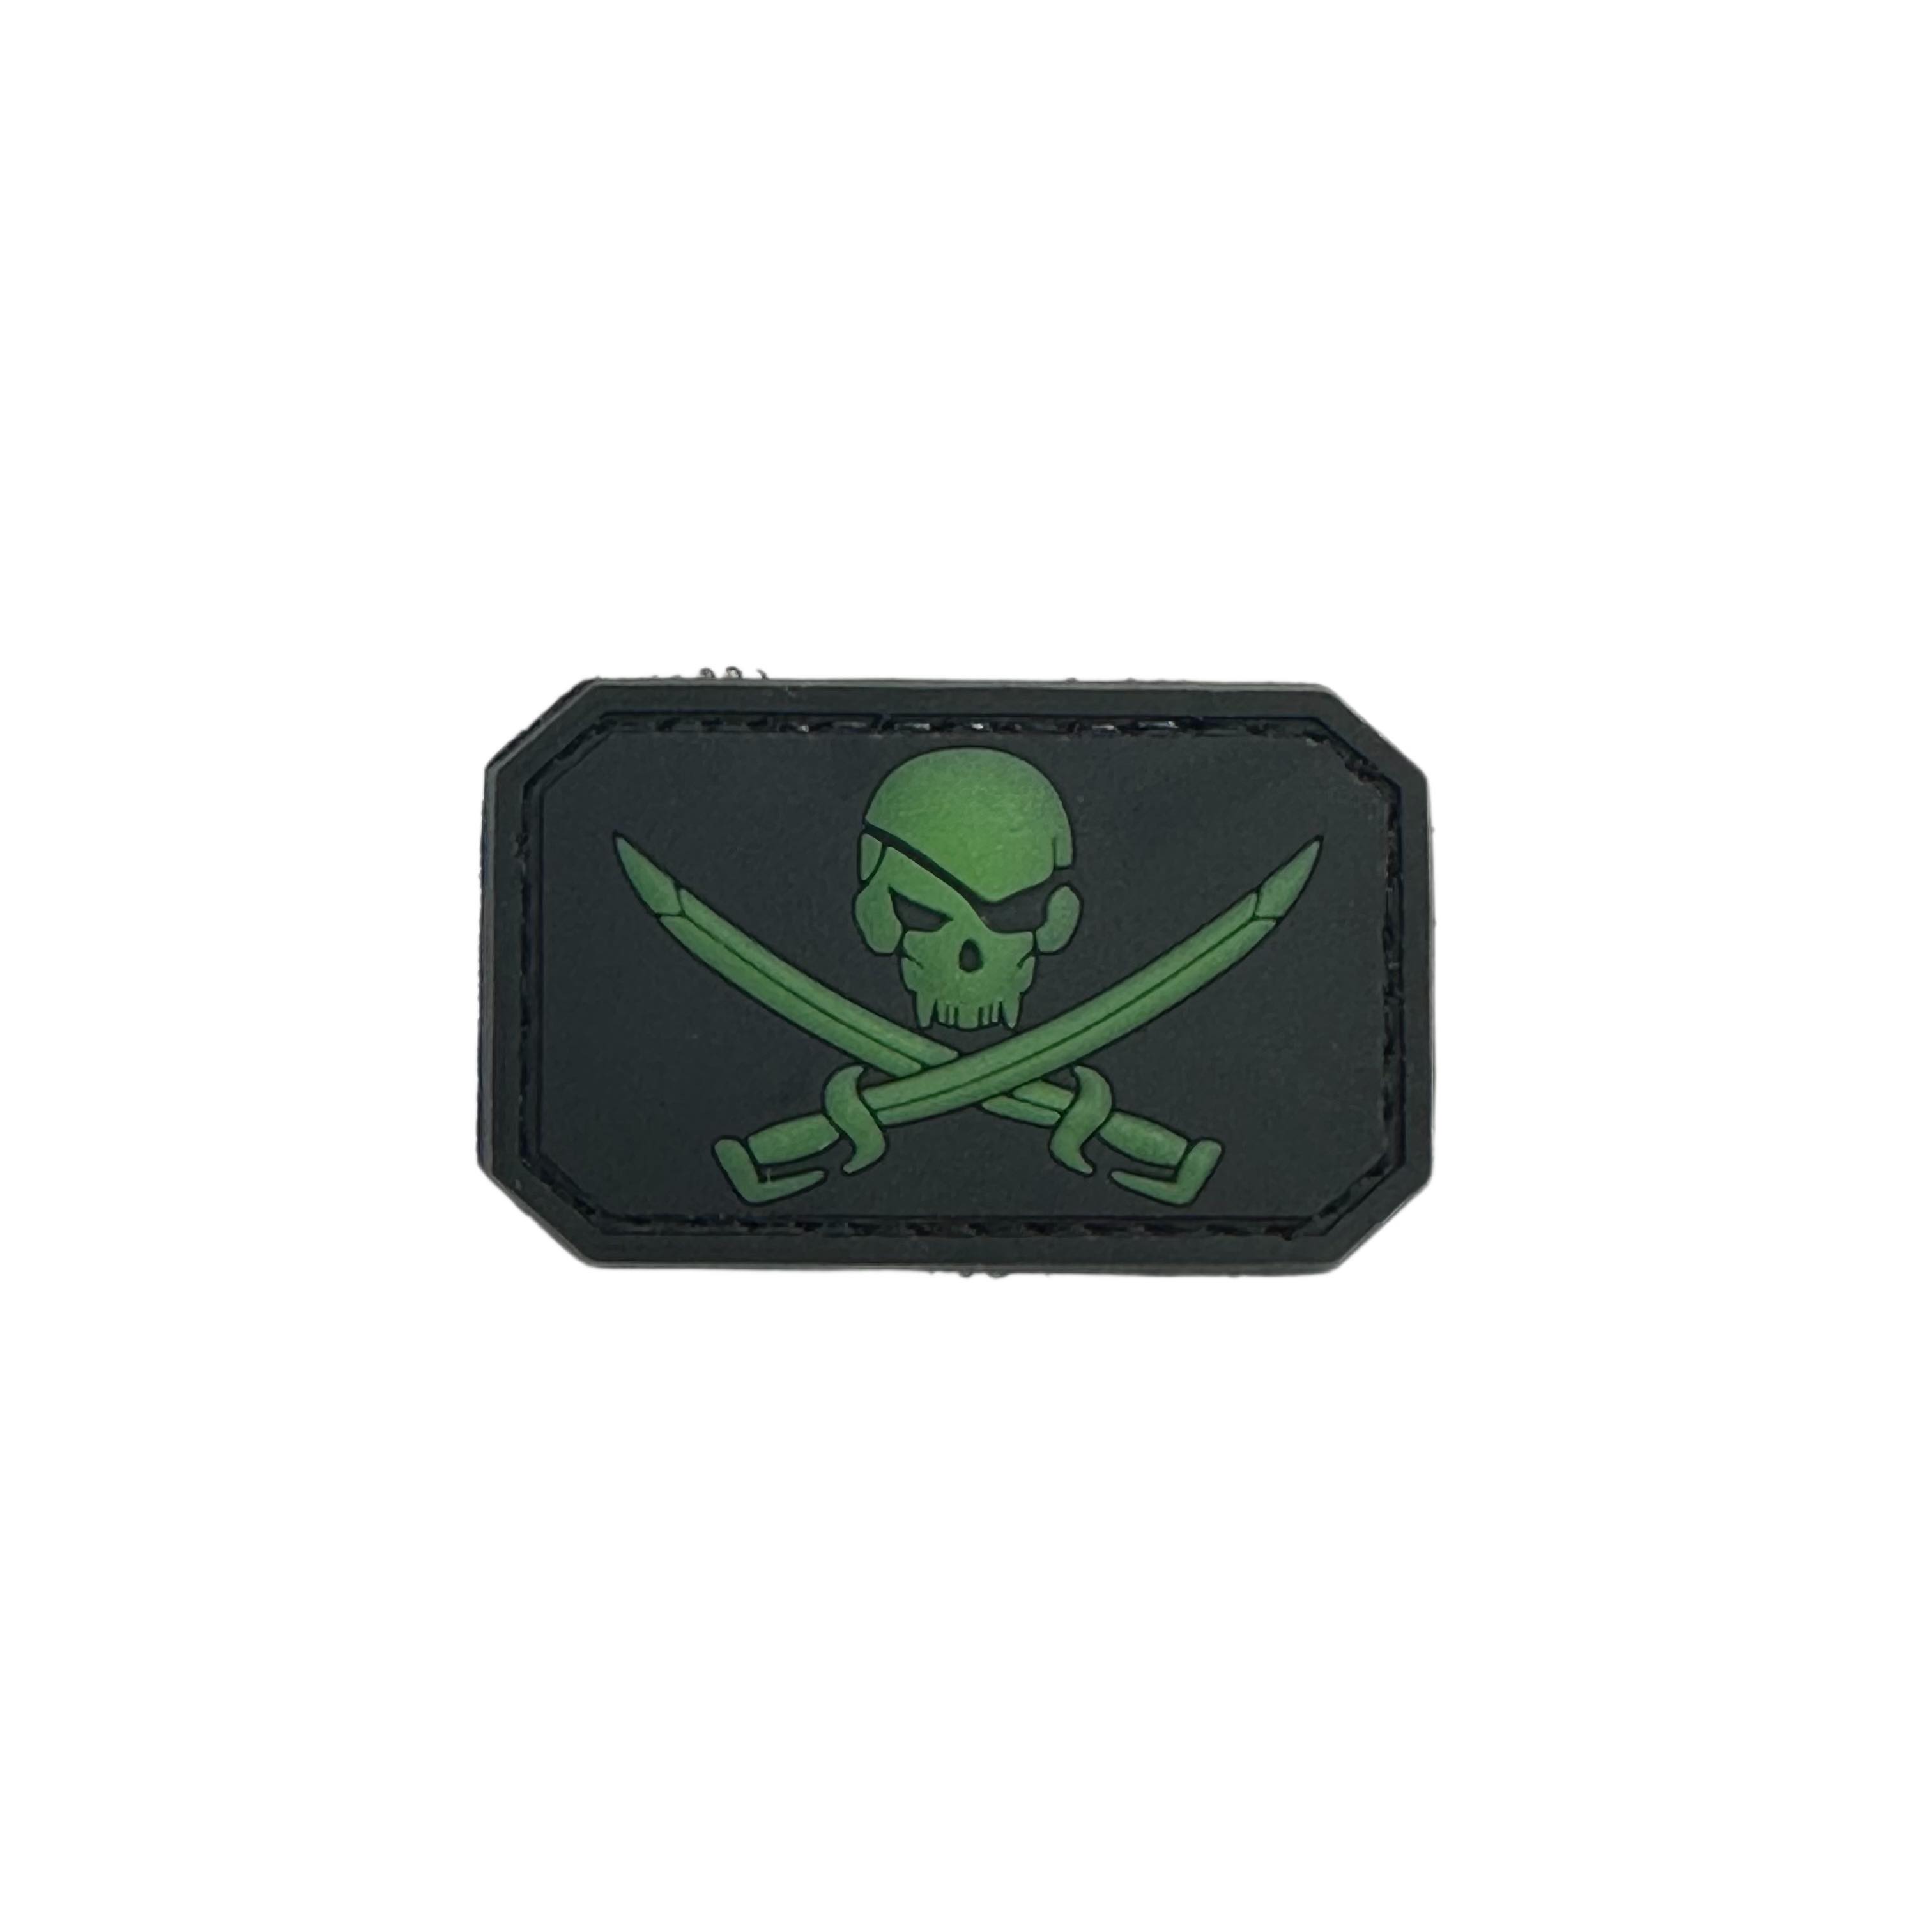 Rubber Patch - Pirate Skull